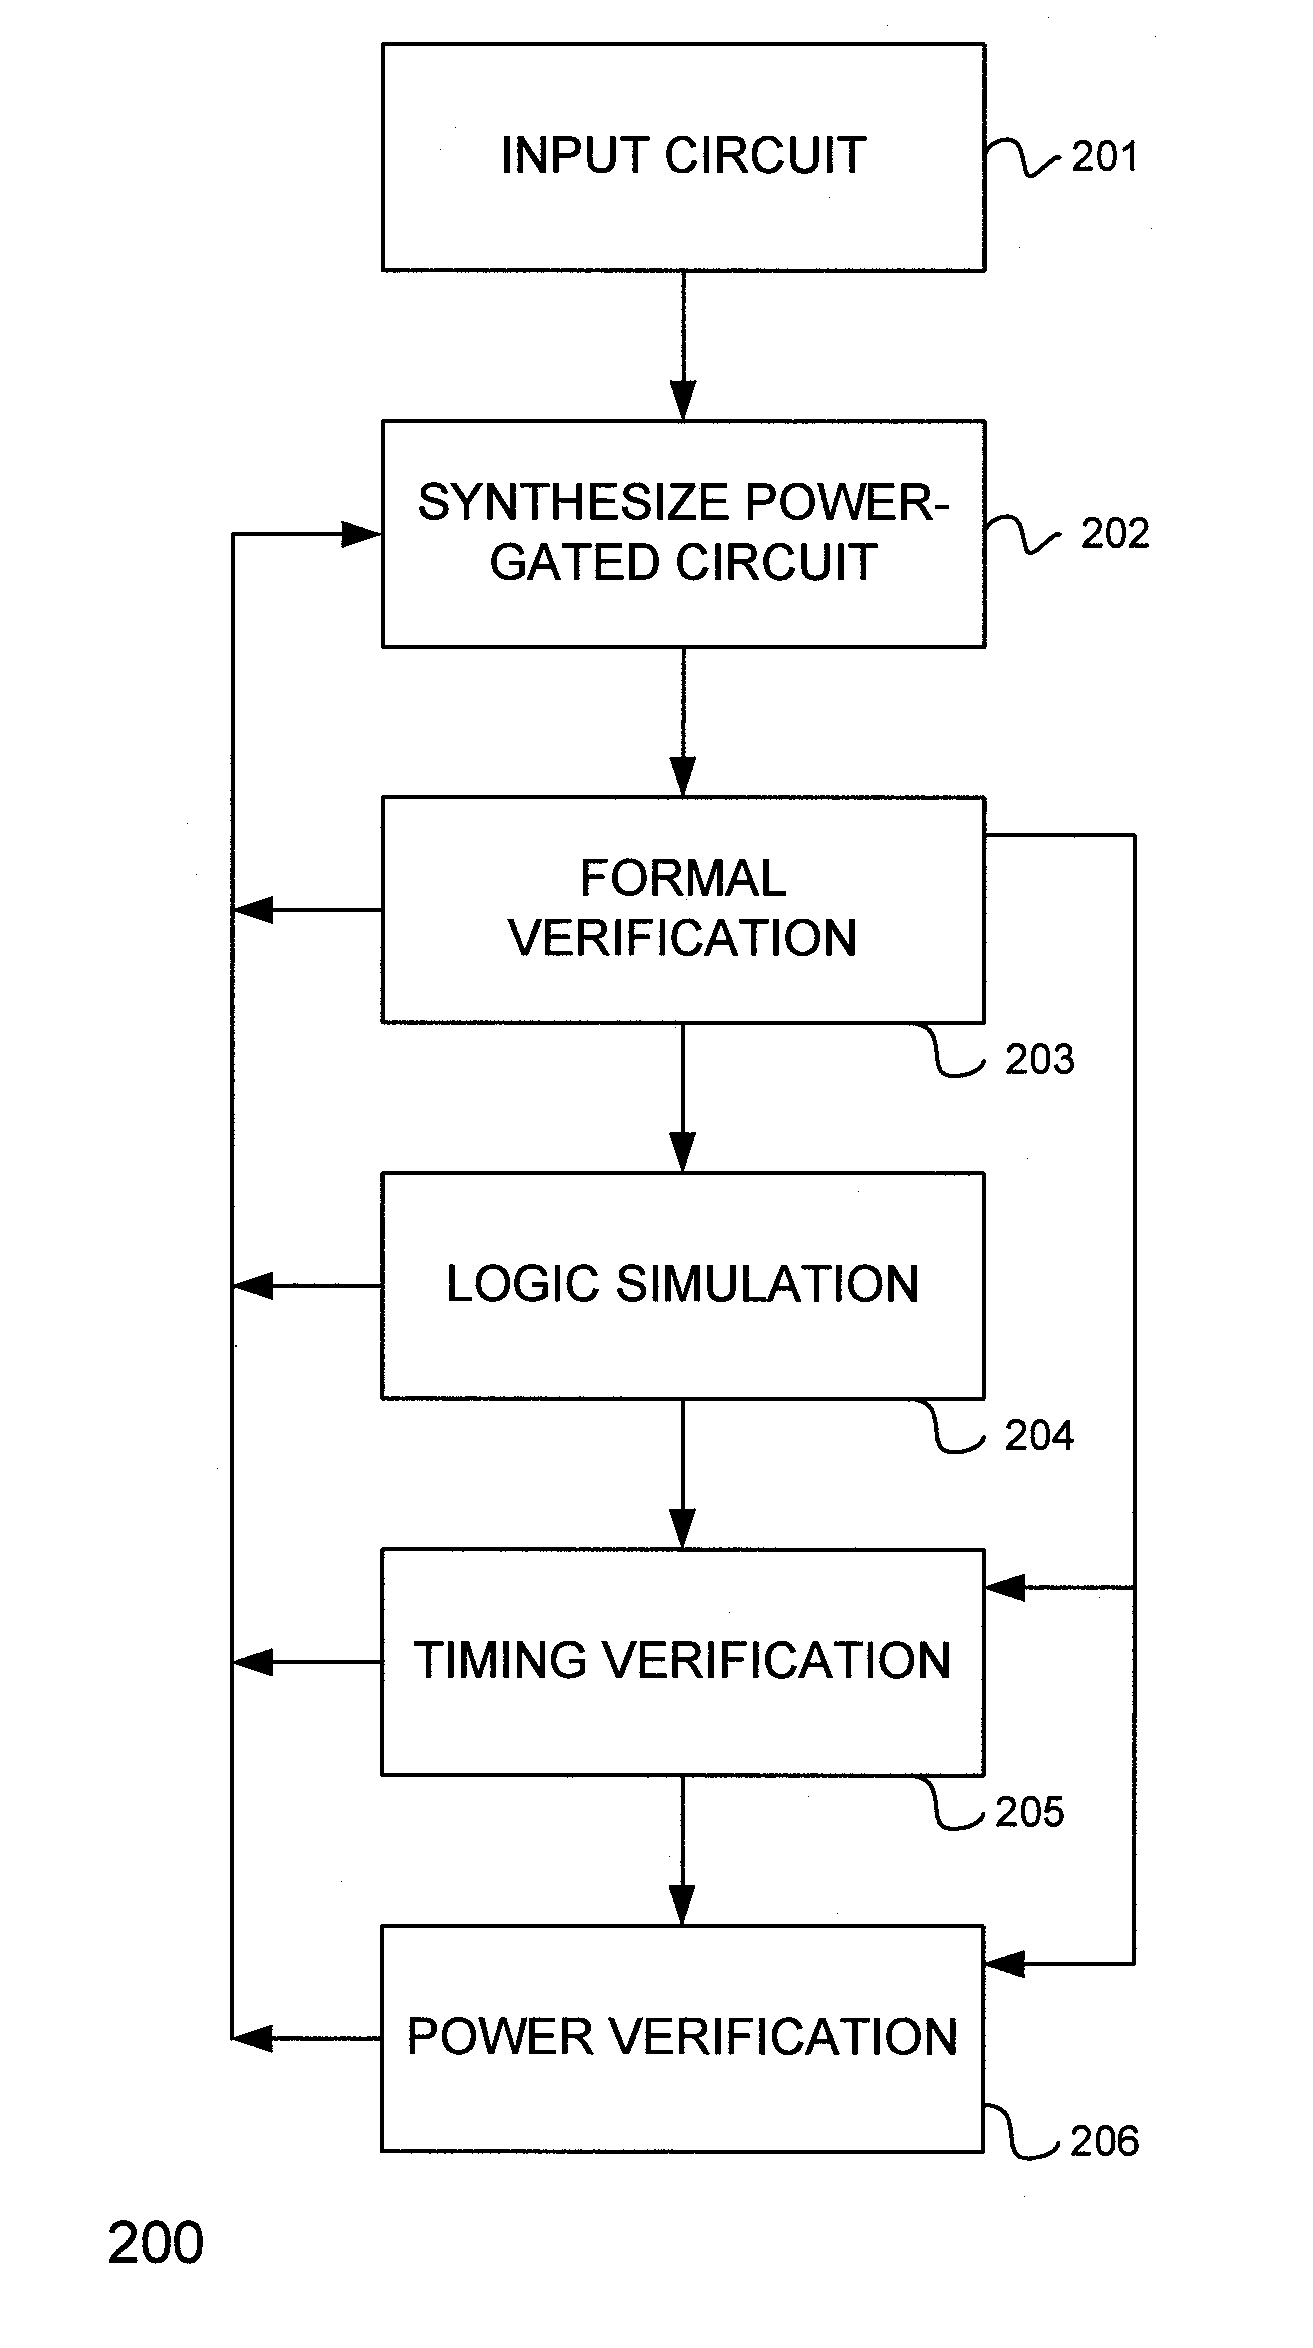 Method that allows flexible evaluation of power-gated circuits